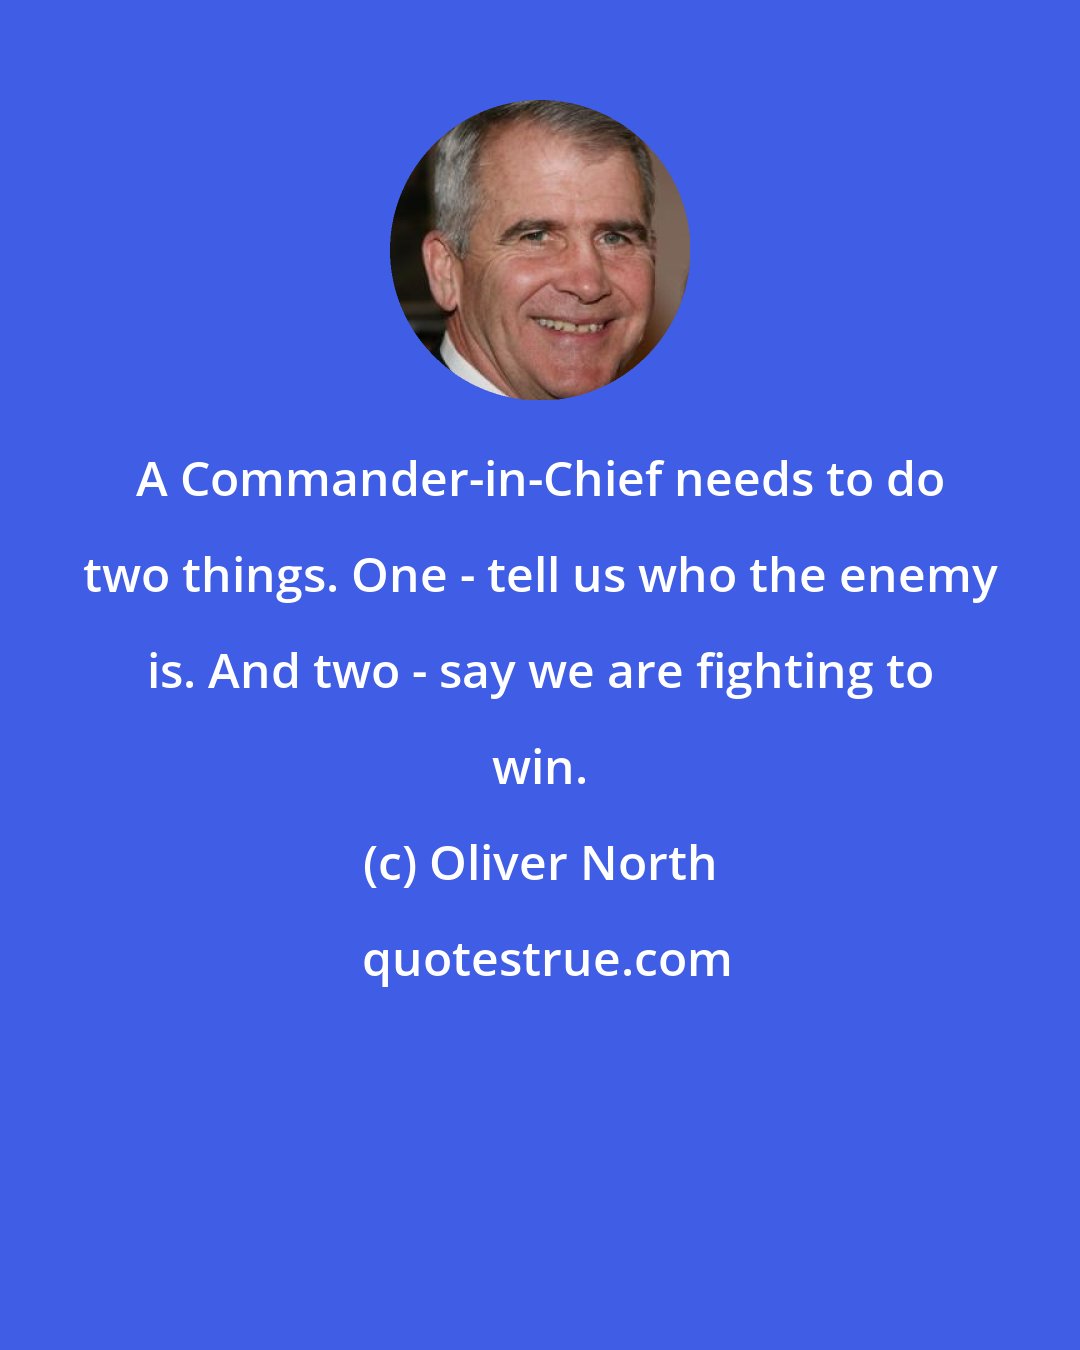 Oliver North: A Commander-in-Chief needs to do two things. One - tell us who the enemy is. And two - say we are fighting to win.